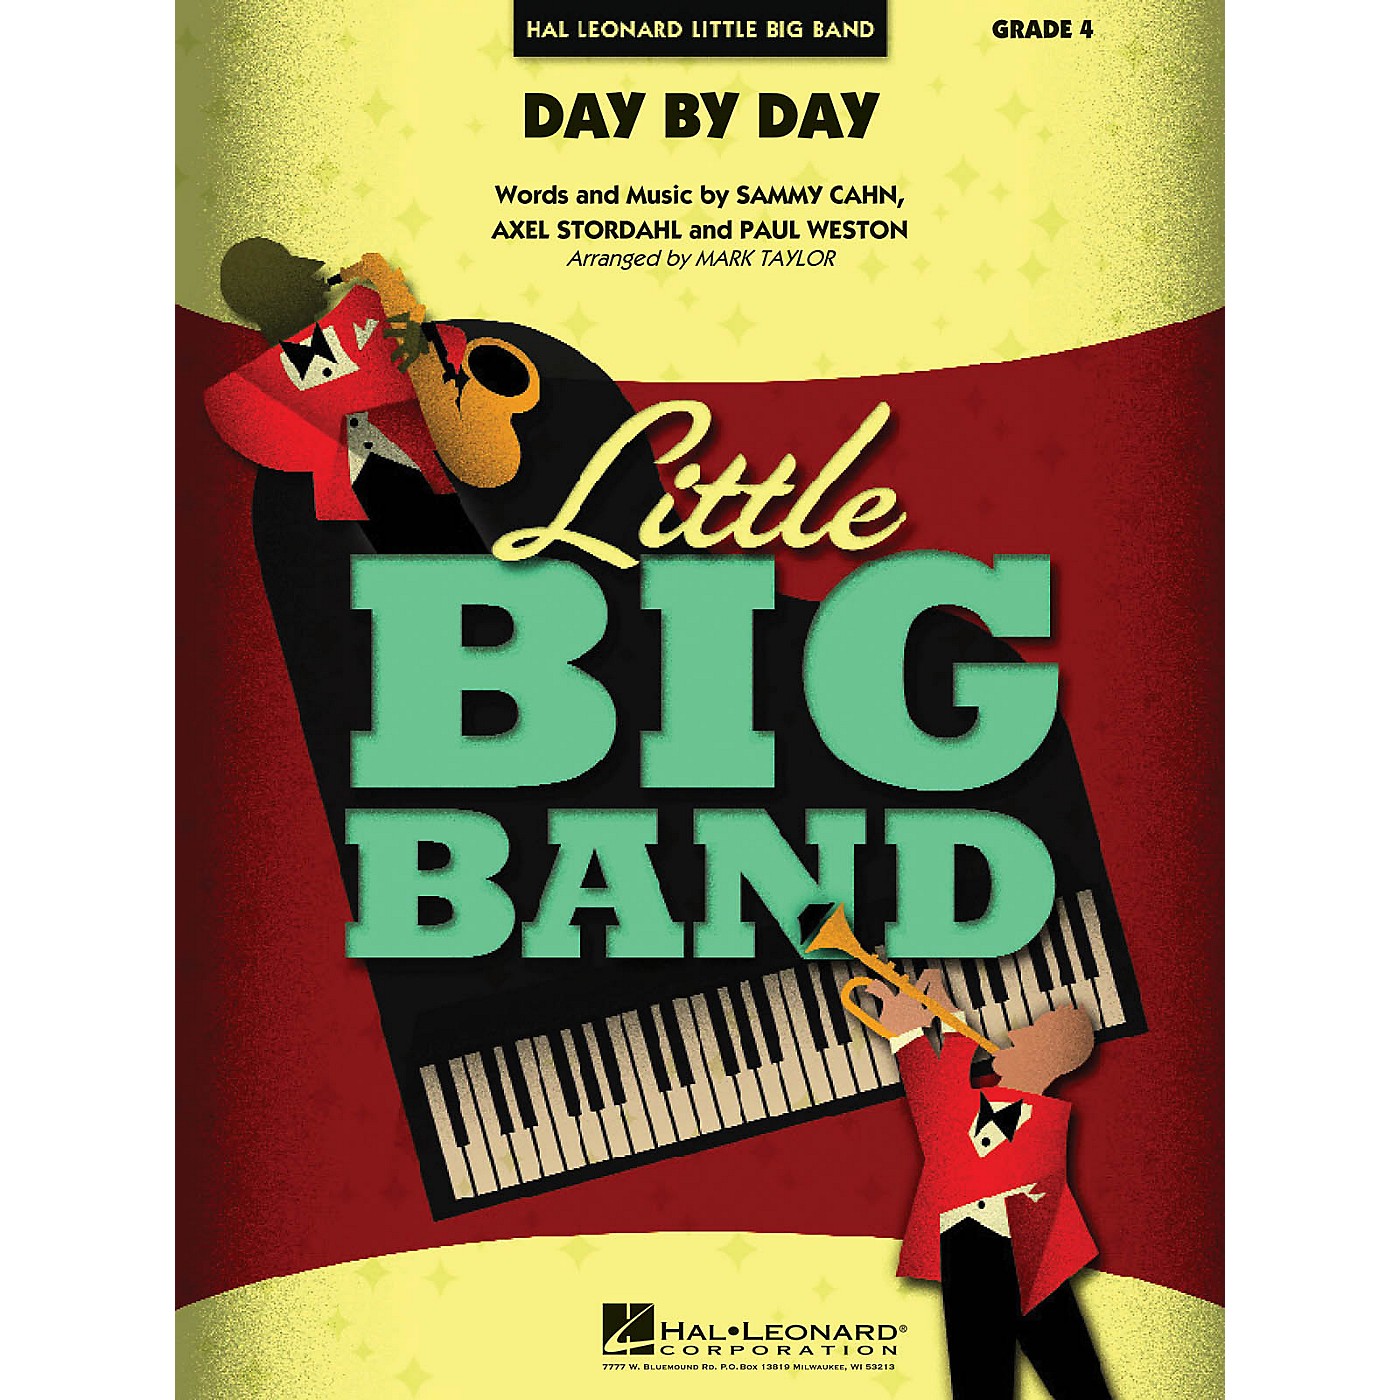 Hal Leonard Day by Day Jazz Band Level 3-4 Arranged by Mark Taylor thumbnail